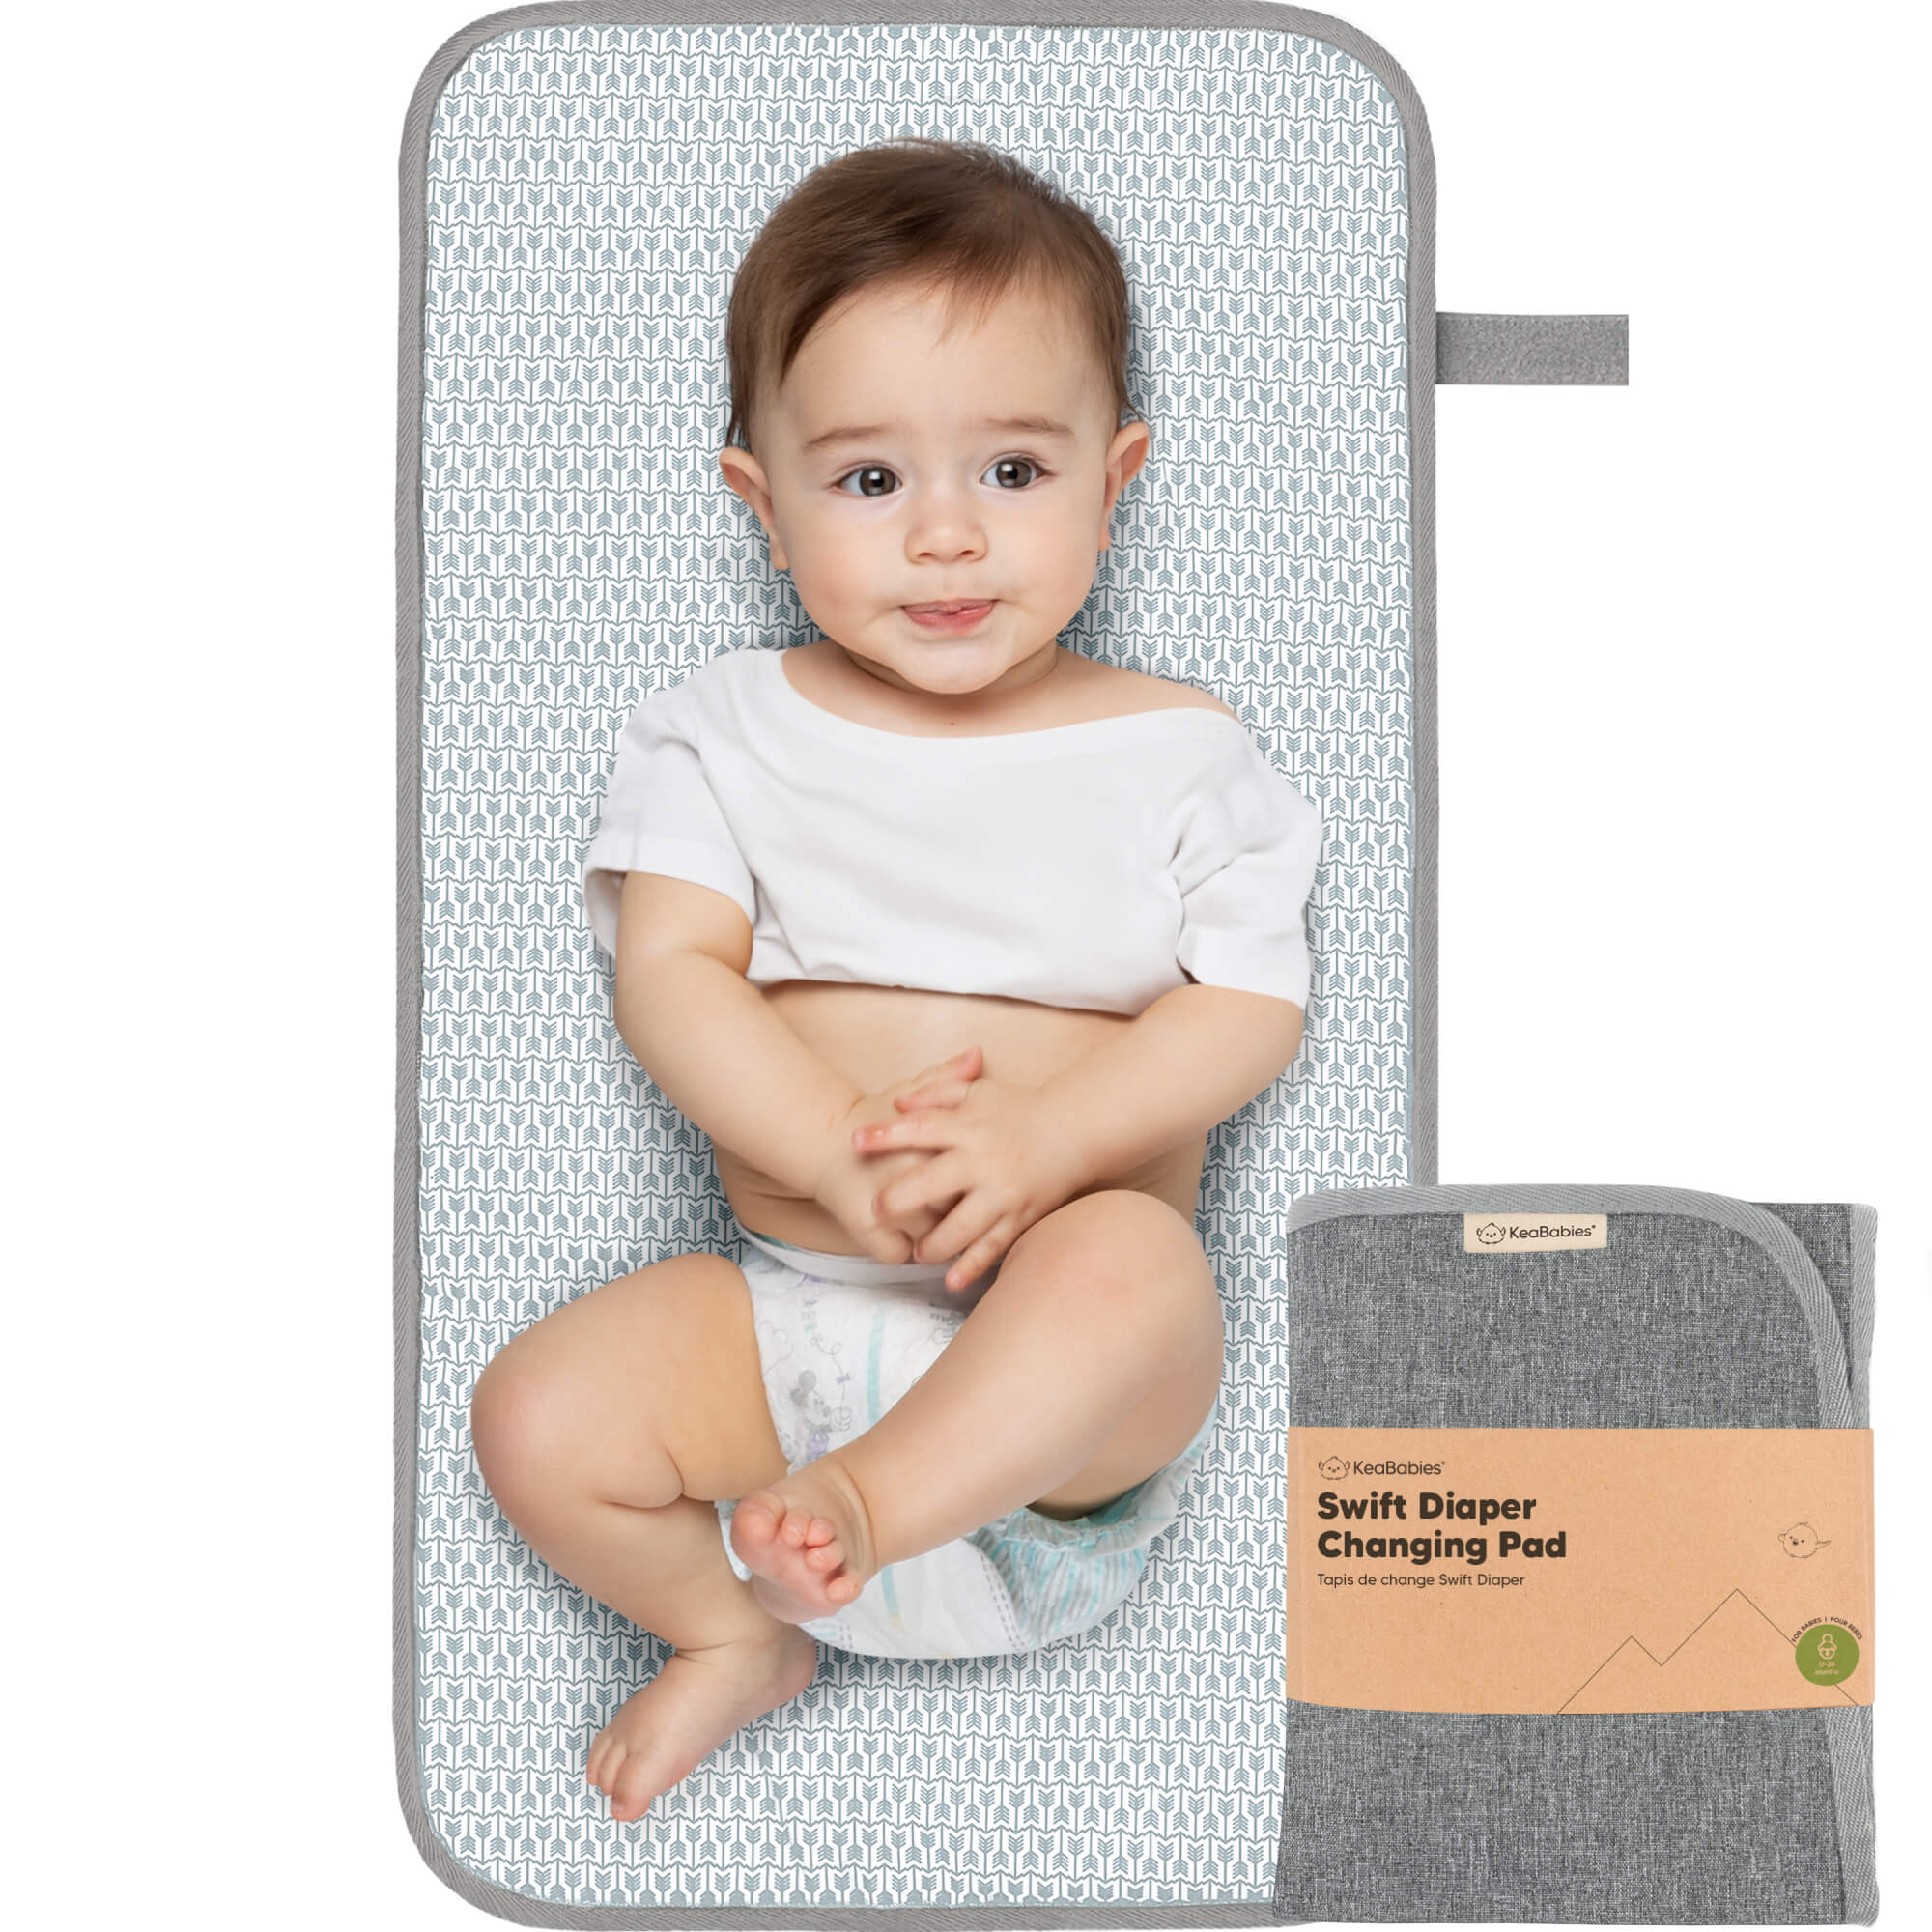 Changing Pads—Baby Diaper Changing Mats & Pads